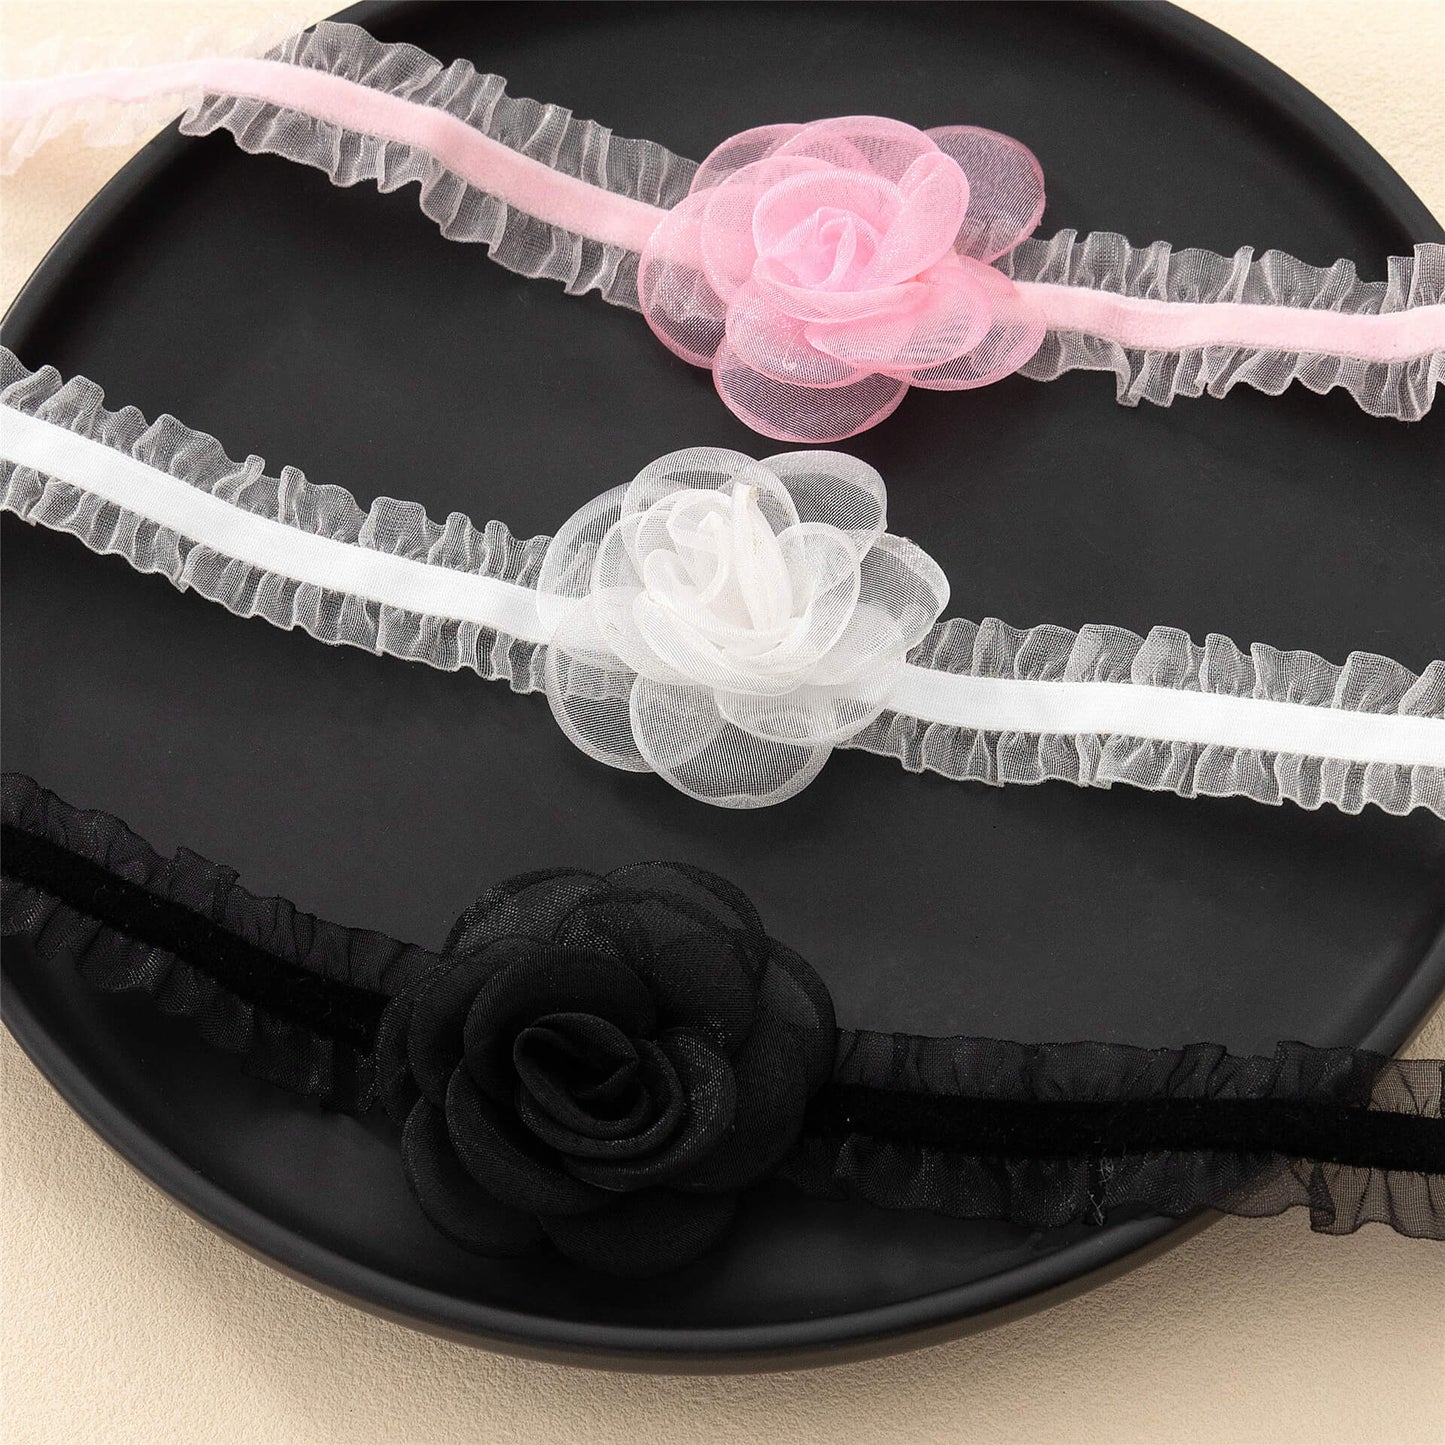 Lace Choker With Flower for Femboy - Femboy Fashion